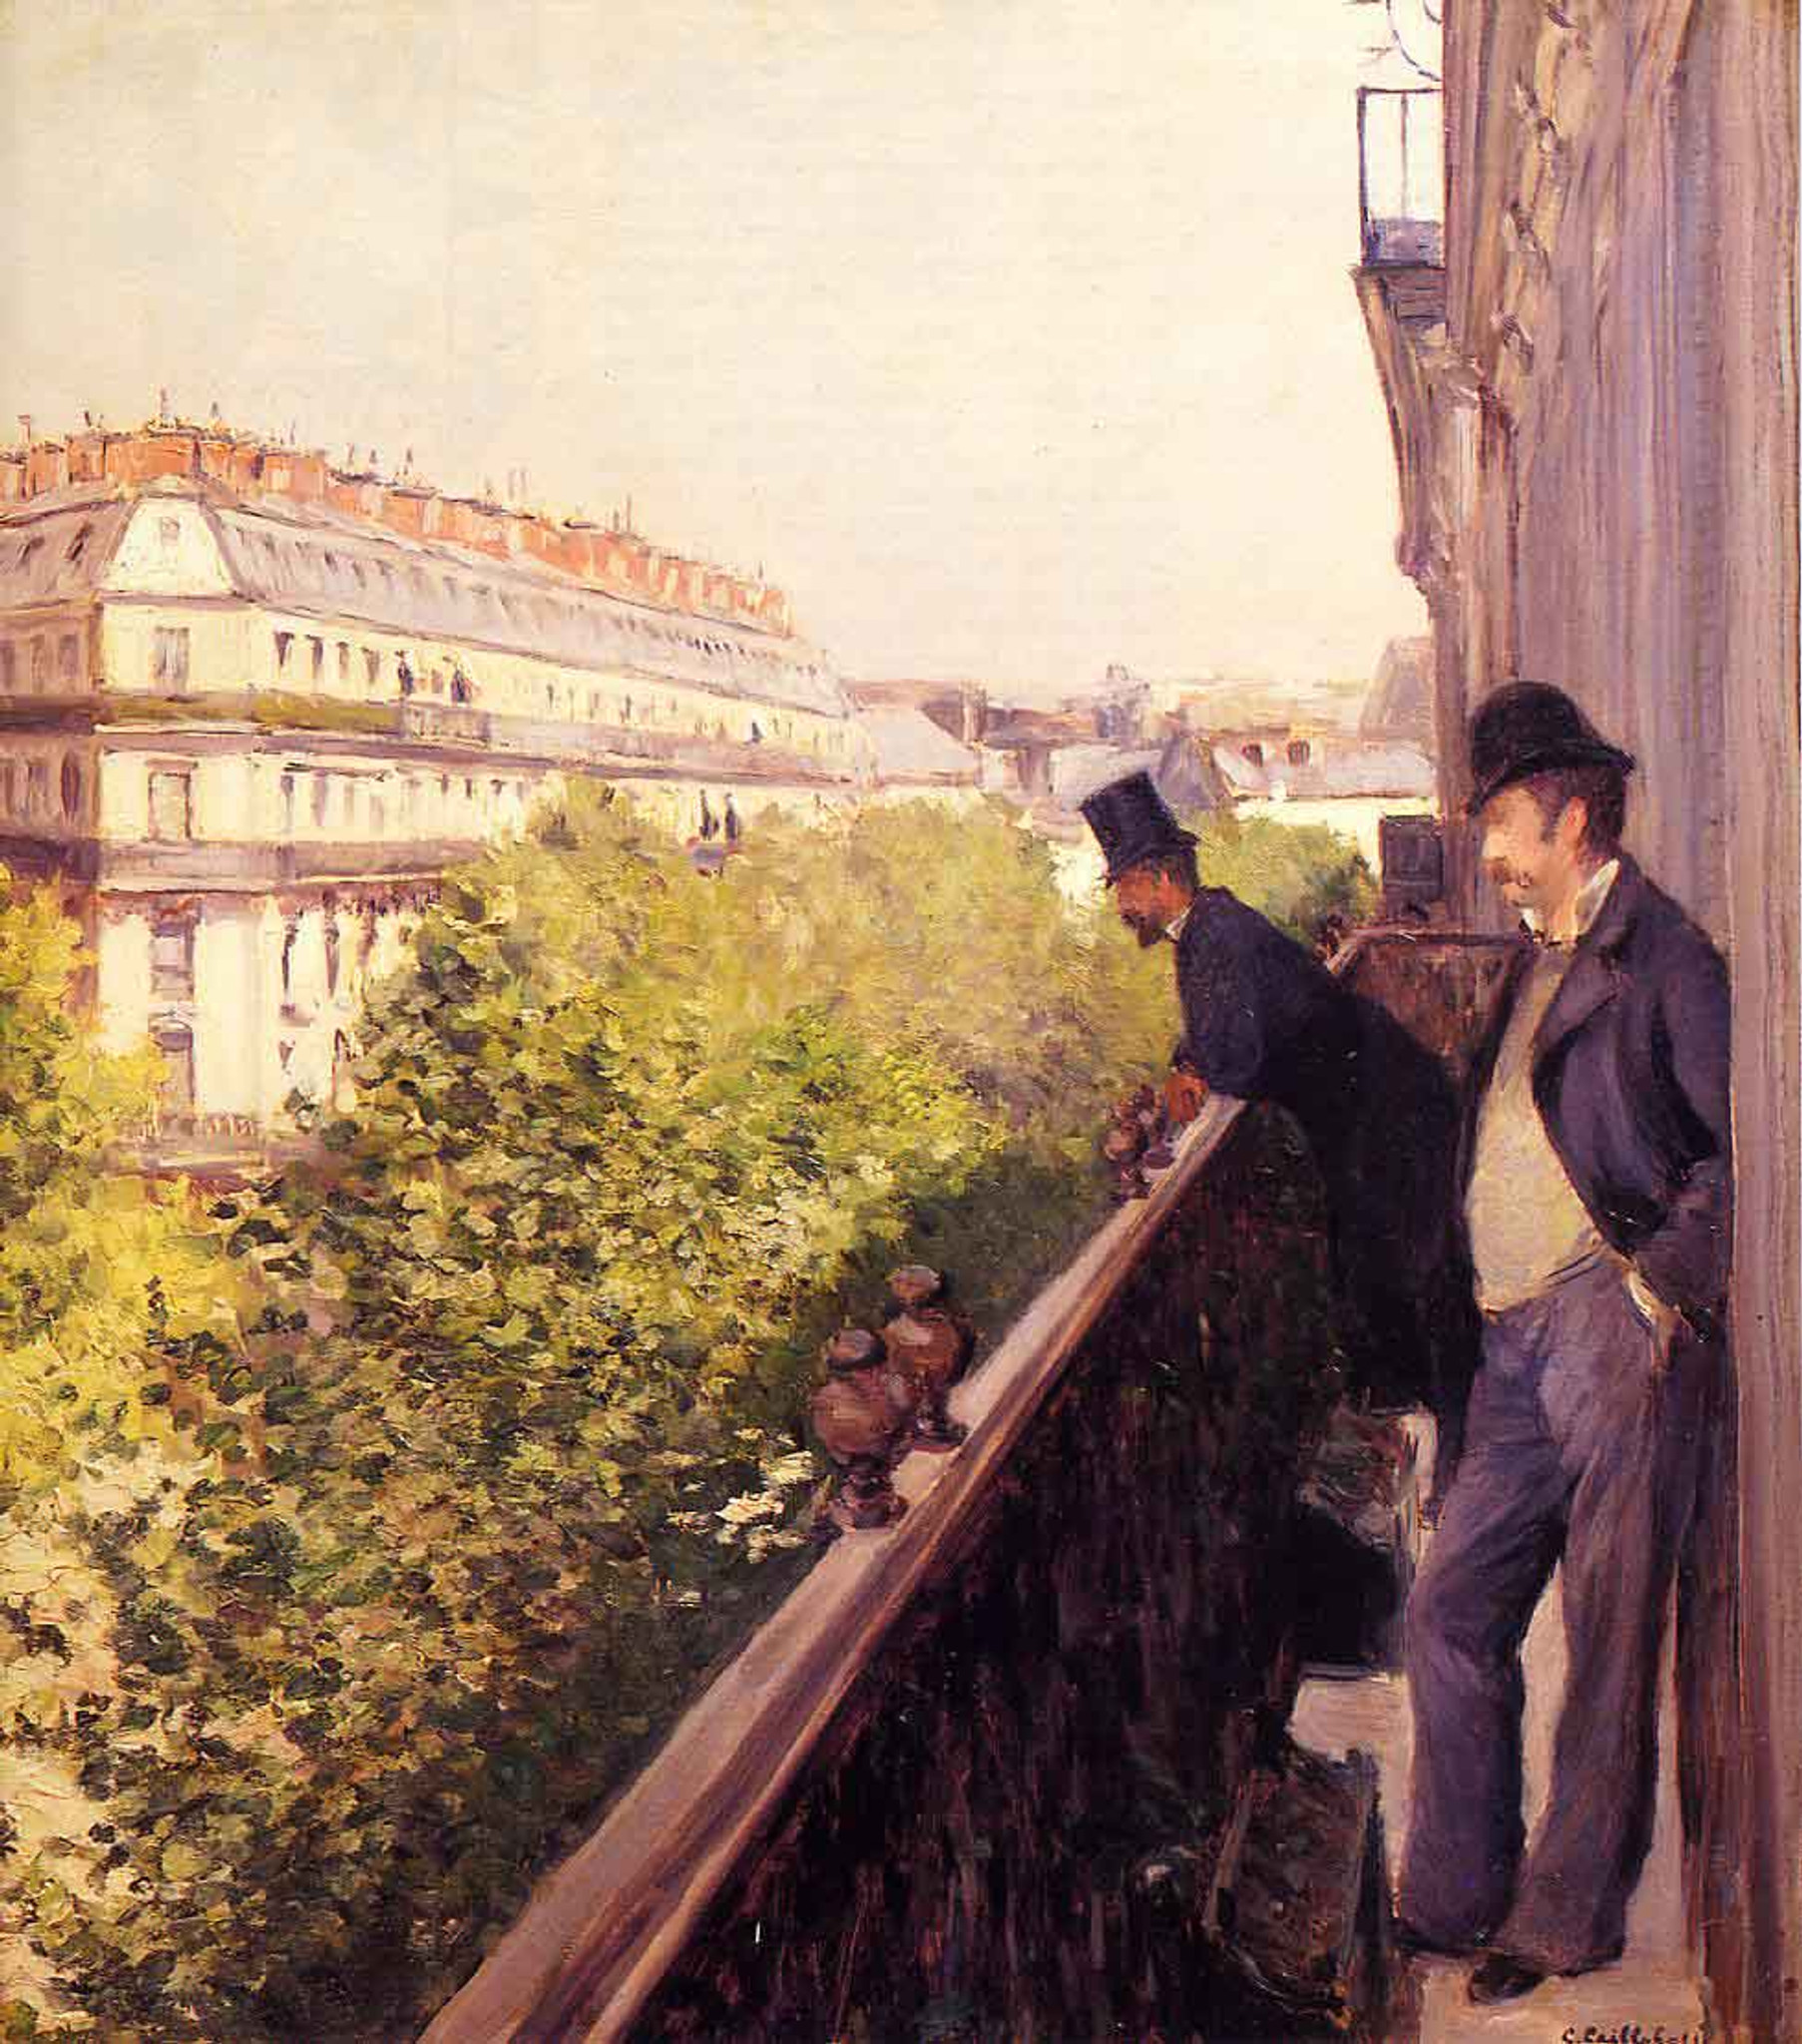 「gustave caillebotte balcony」的圖片搜尋結果